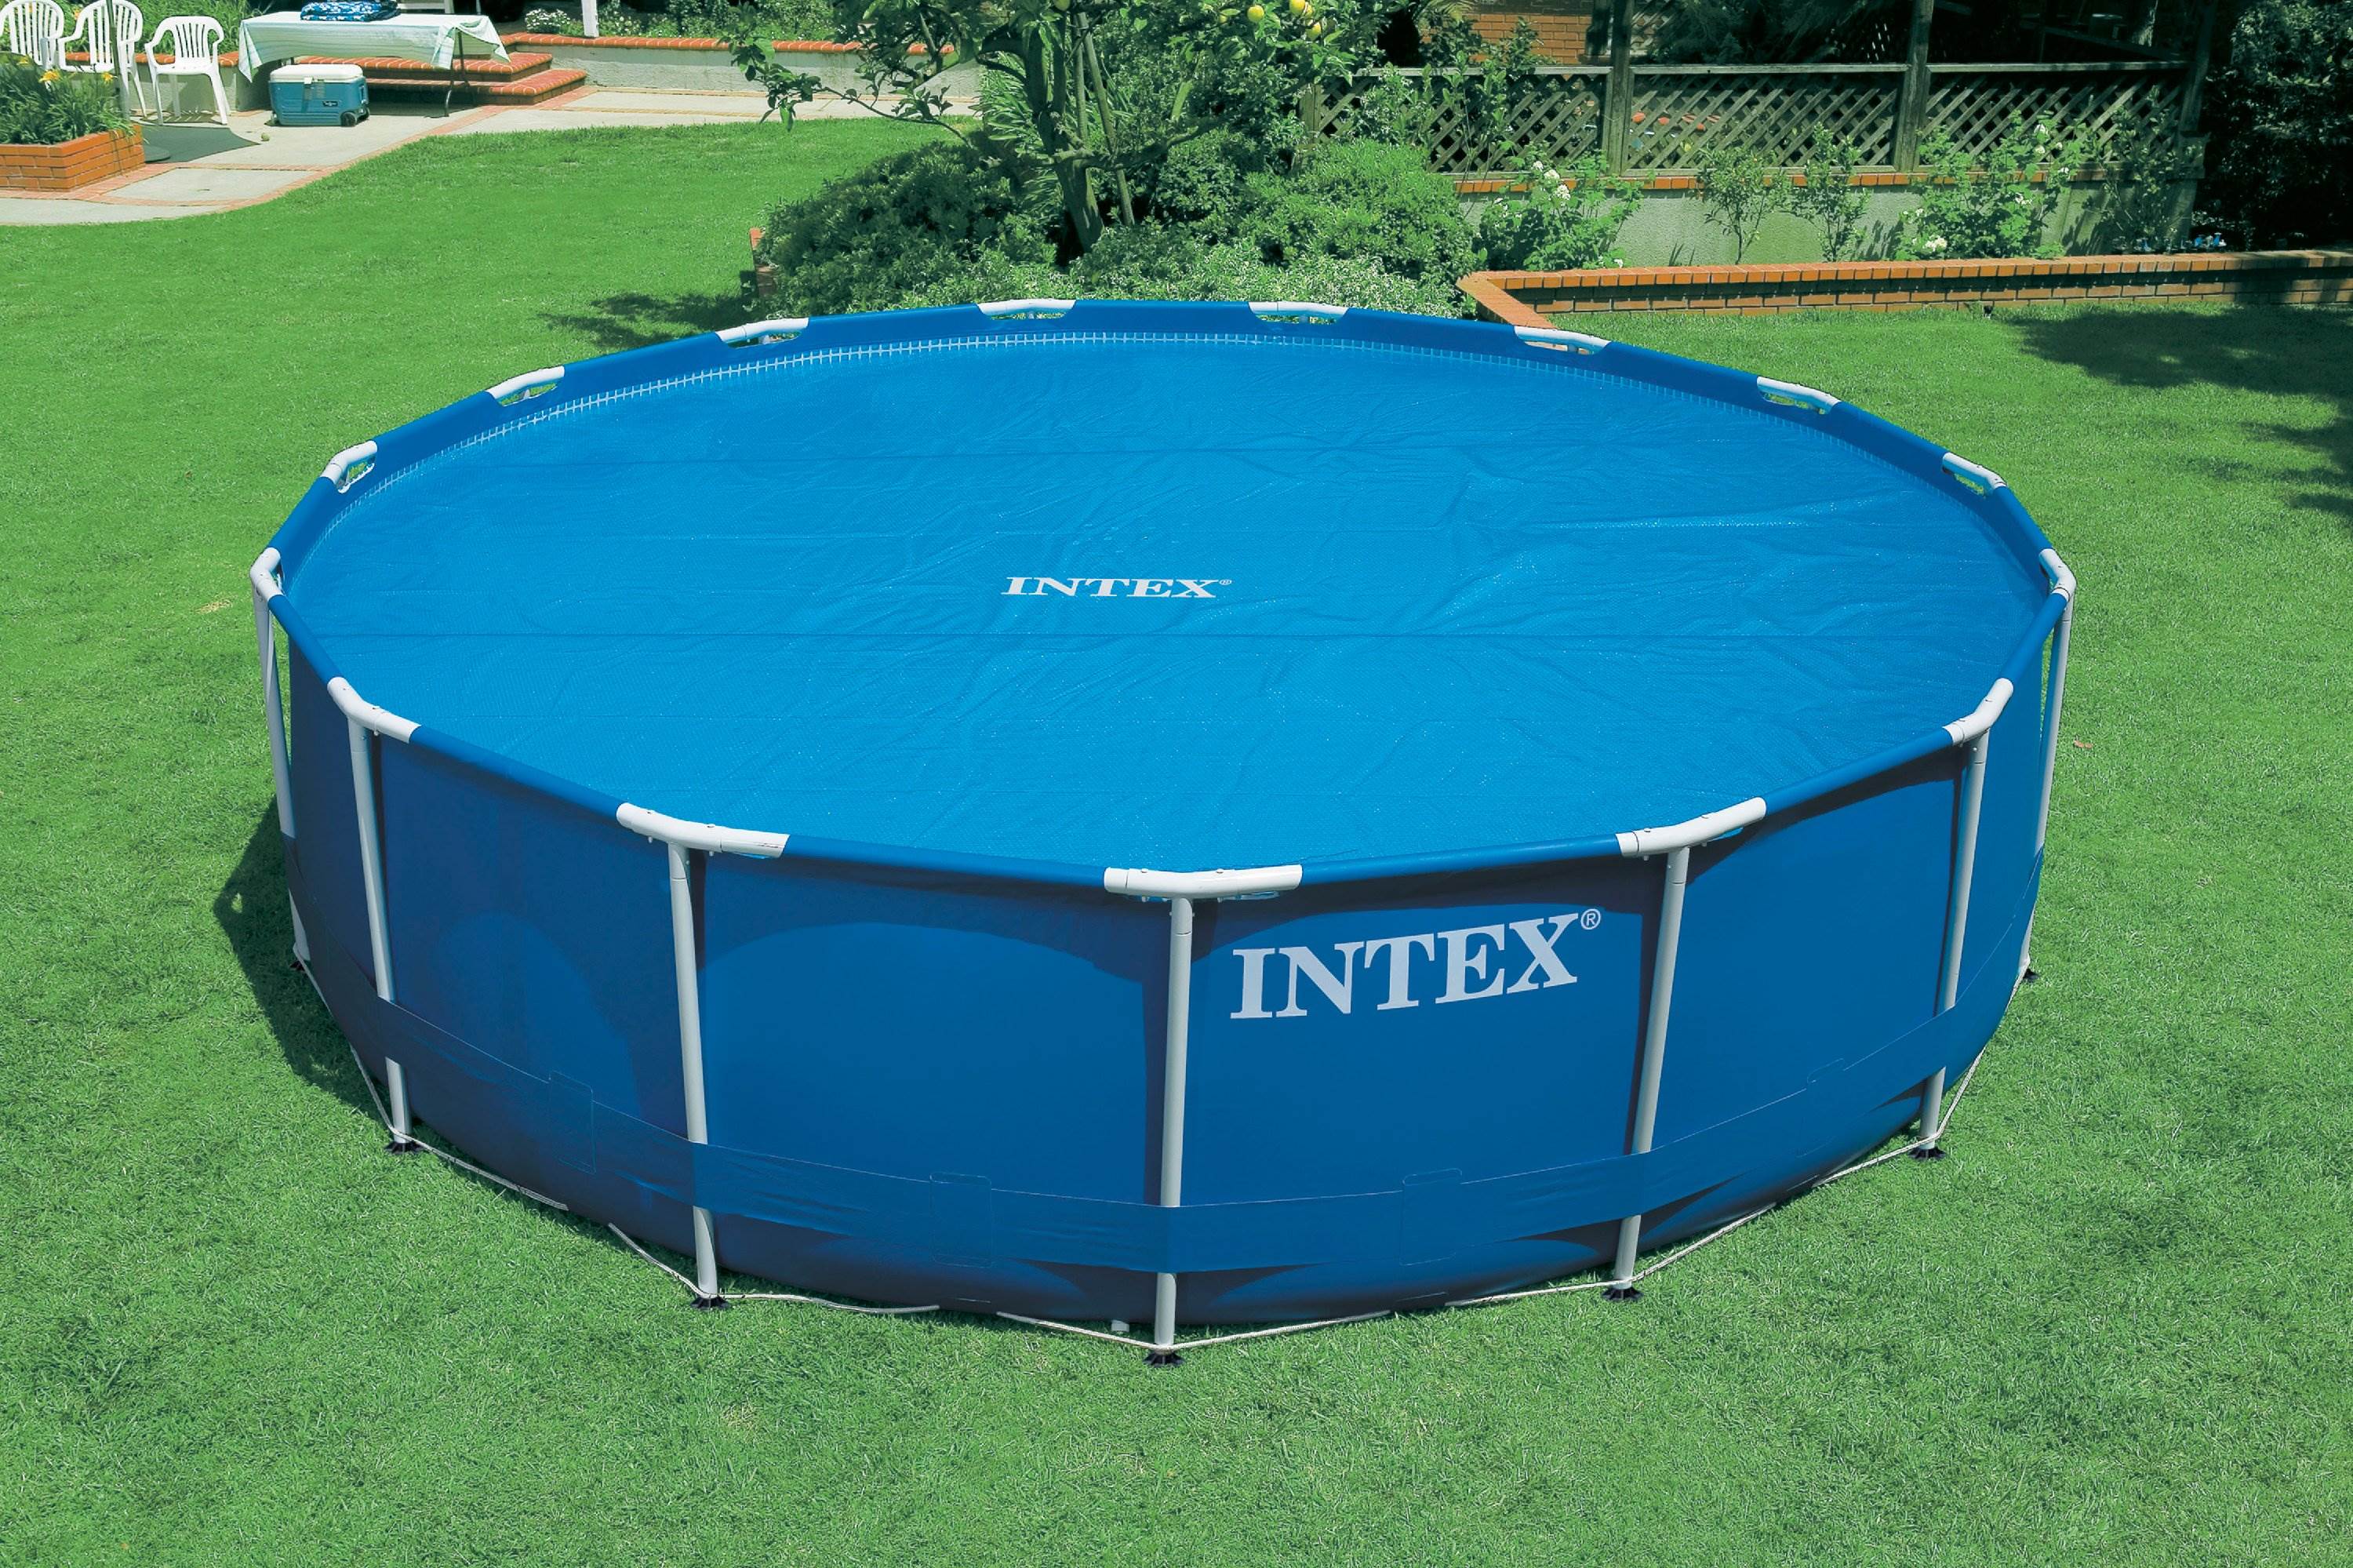 Intex 18 Foot Round Easy Set Blue Solar Cover for Swimming Pools Pool Cover Only eBay